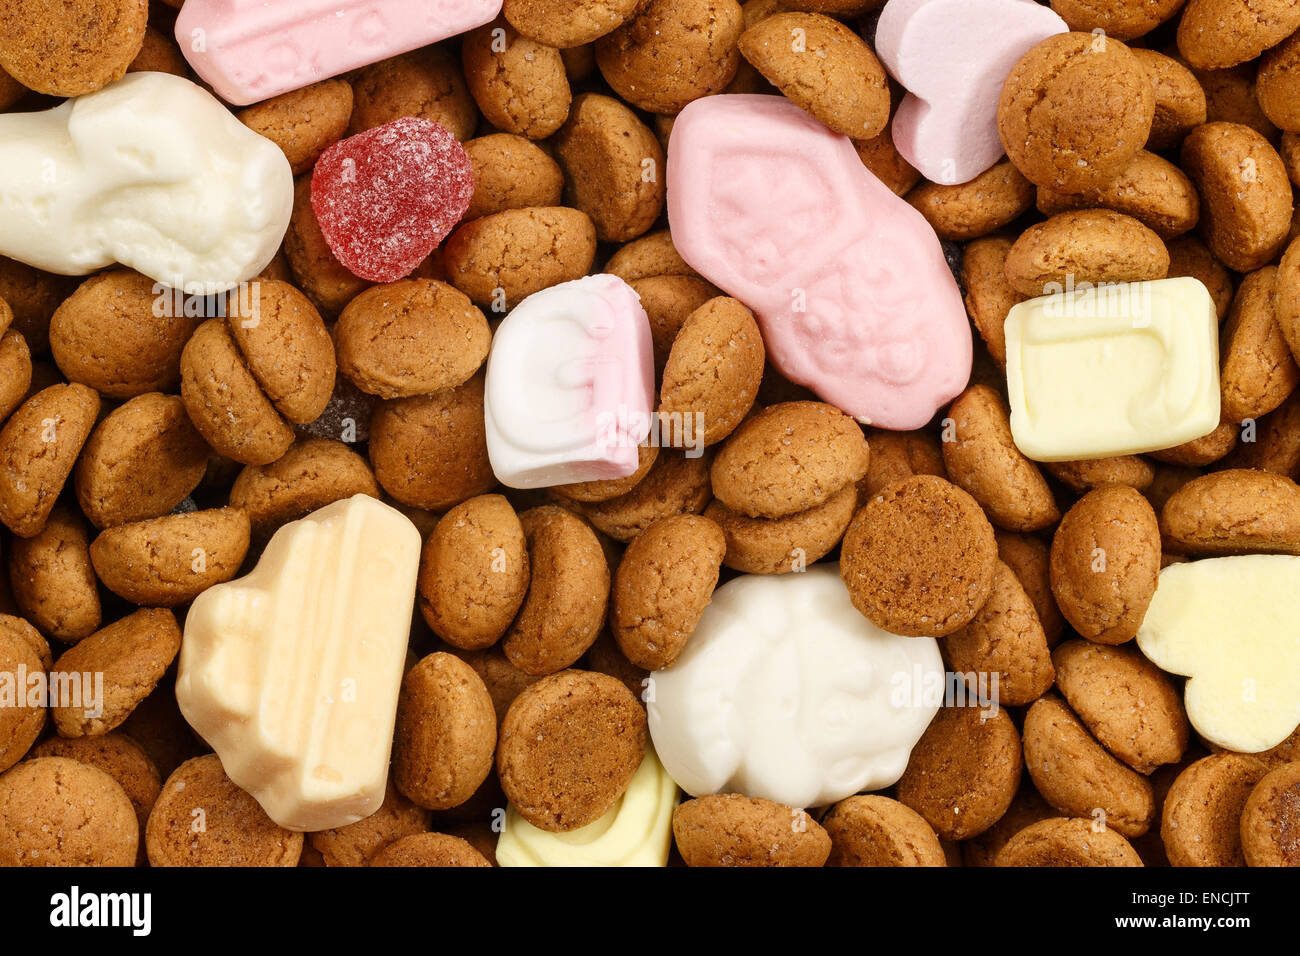 Background pepernoten and colorful sweets Sinterklaas. Typical food for Sinterklaas celebration on 5 december. Event in Holland, Stock Photo